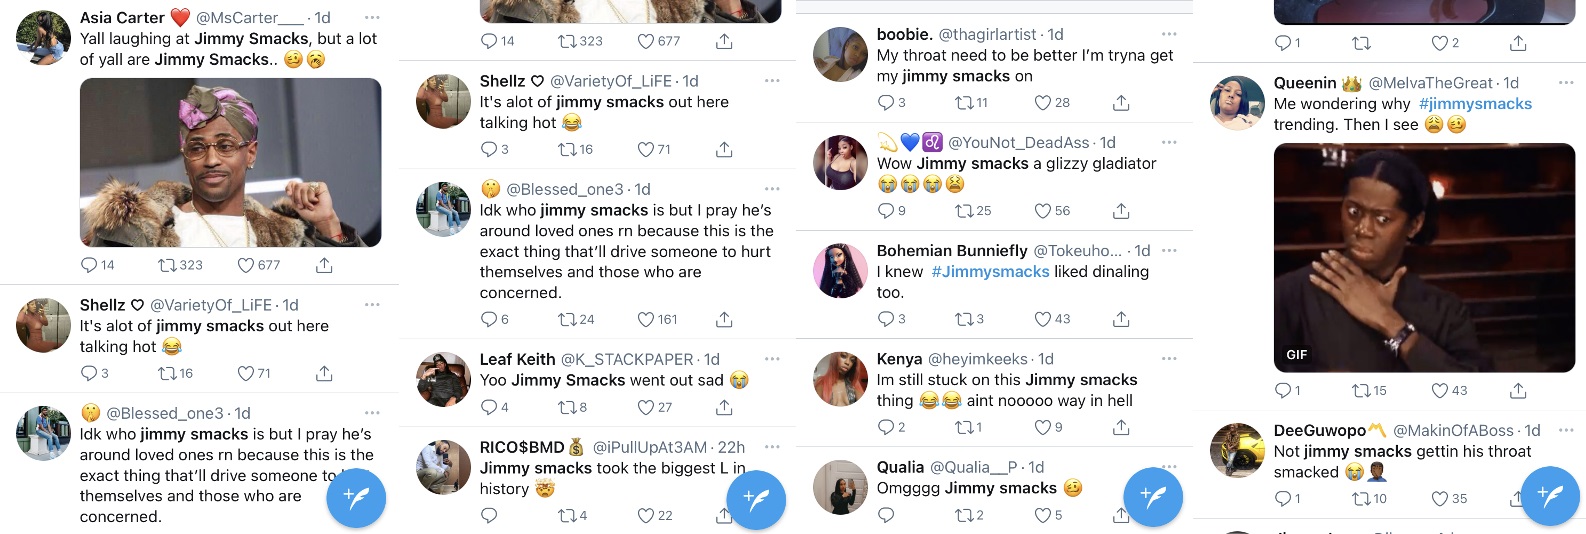 of Jimmy Smacks with a transgender woman, and now Twitter is clowning him, ...